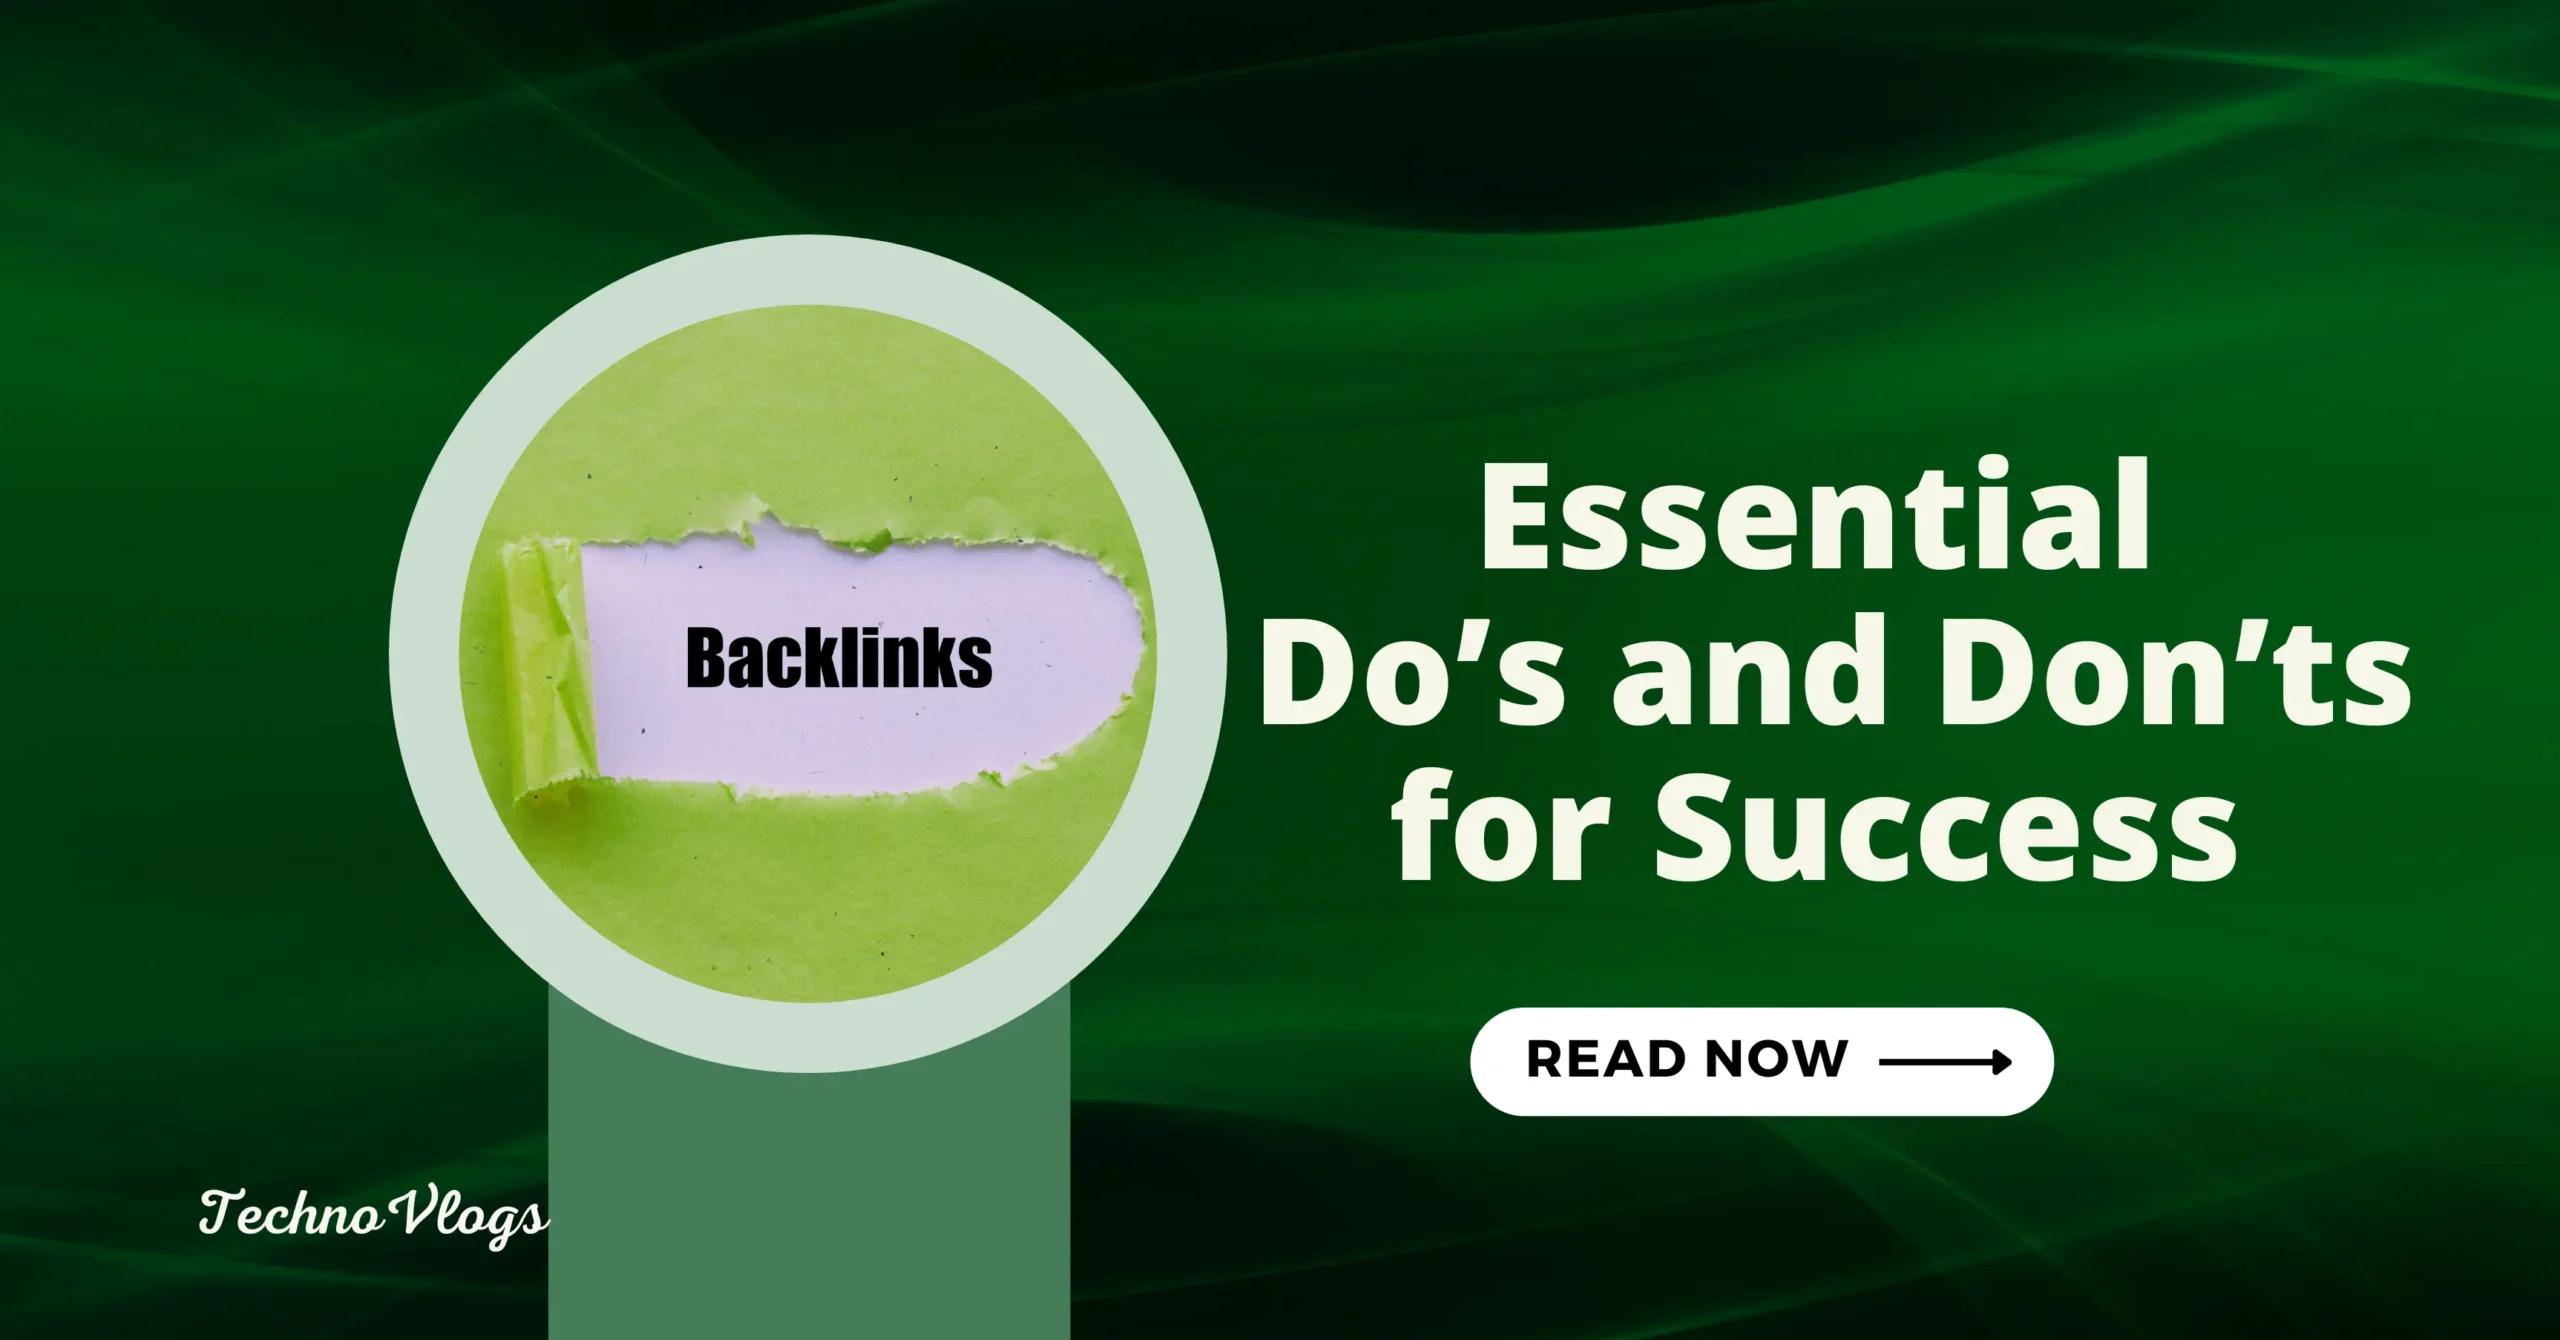 SEO Backlinks: Essential Do’s and Don’ts for Success